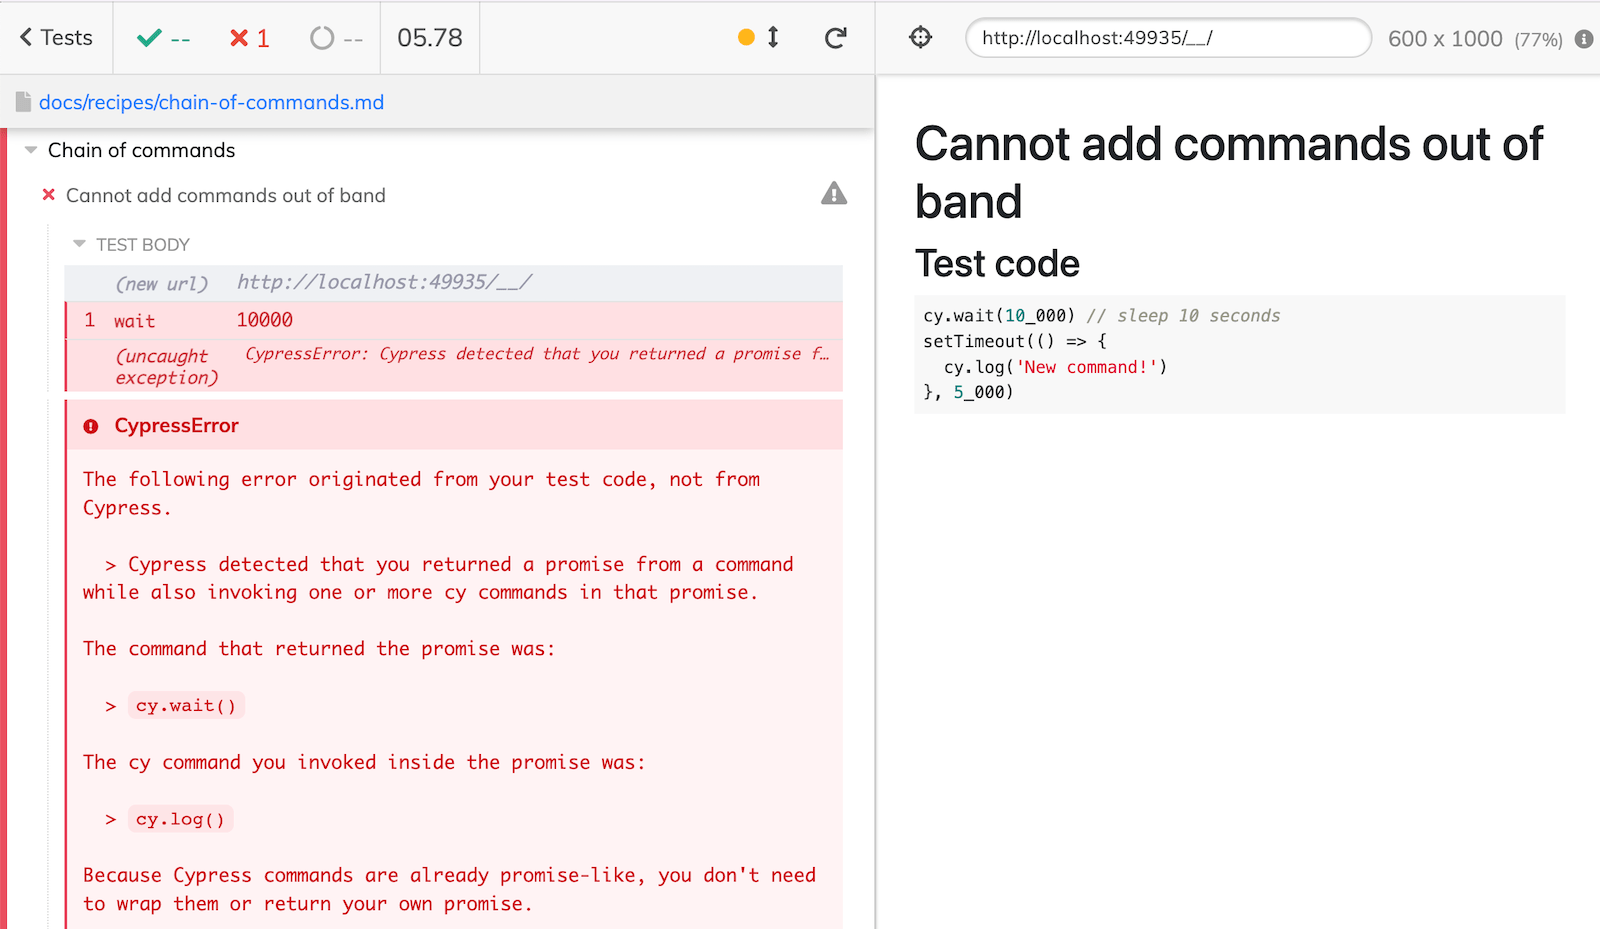 Cypress throws an error if you try to add more commands from outside